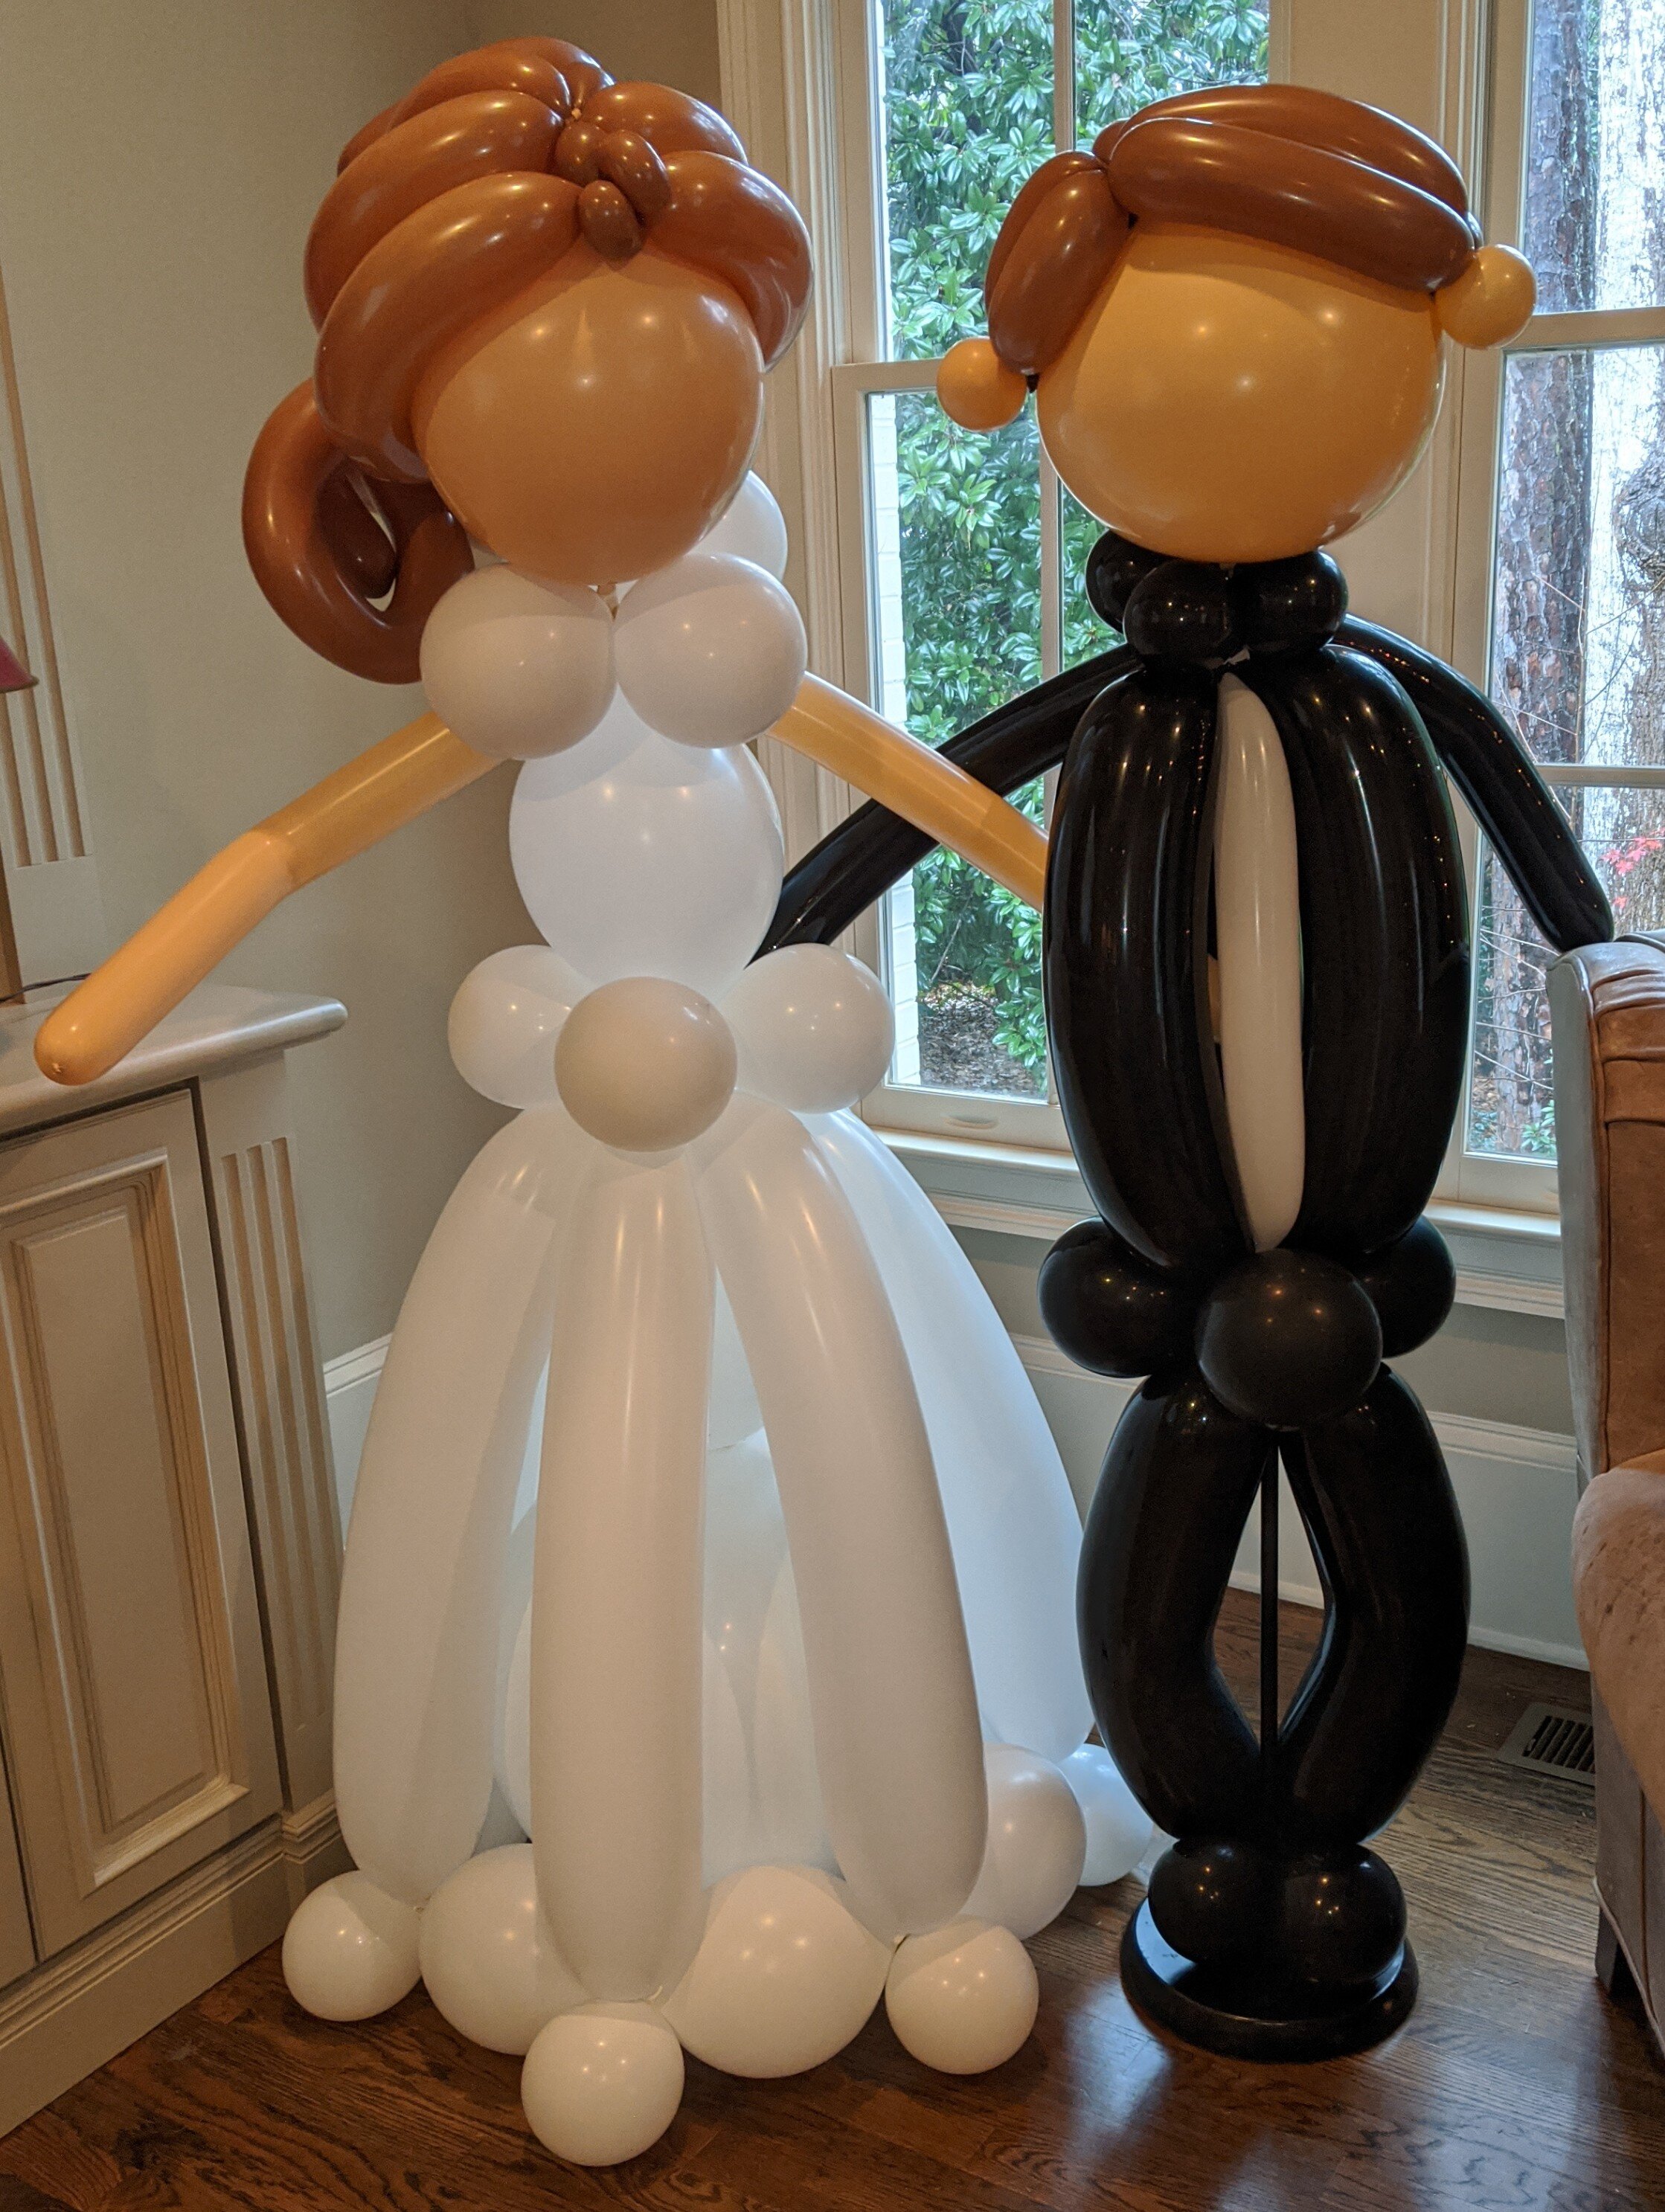 Balloon Bride and Groom